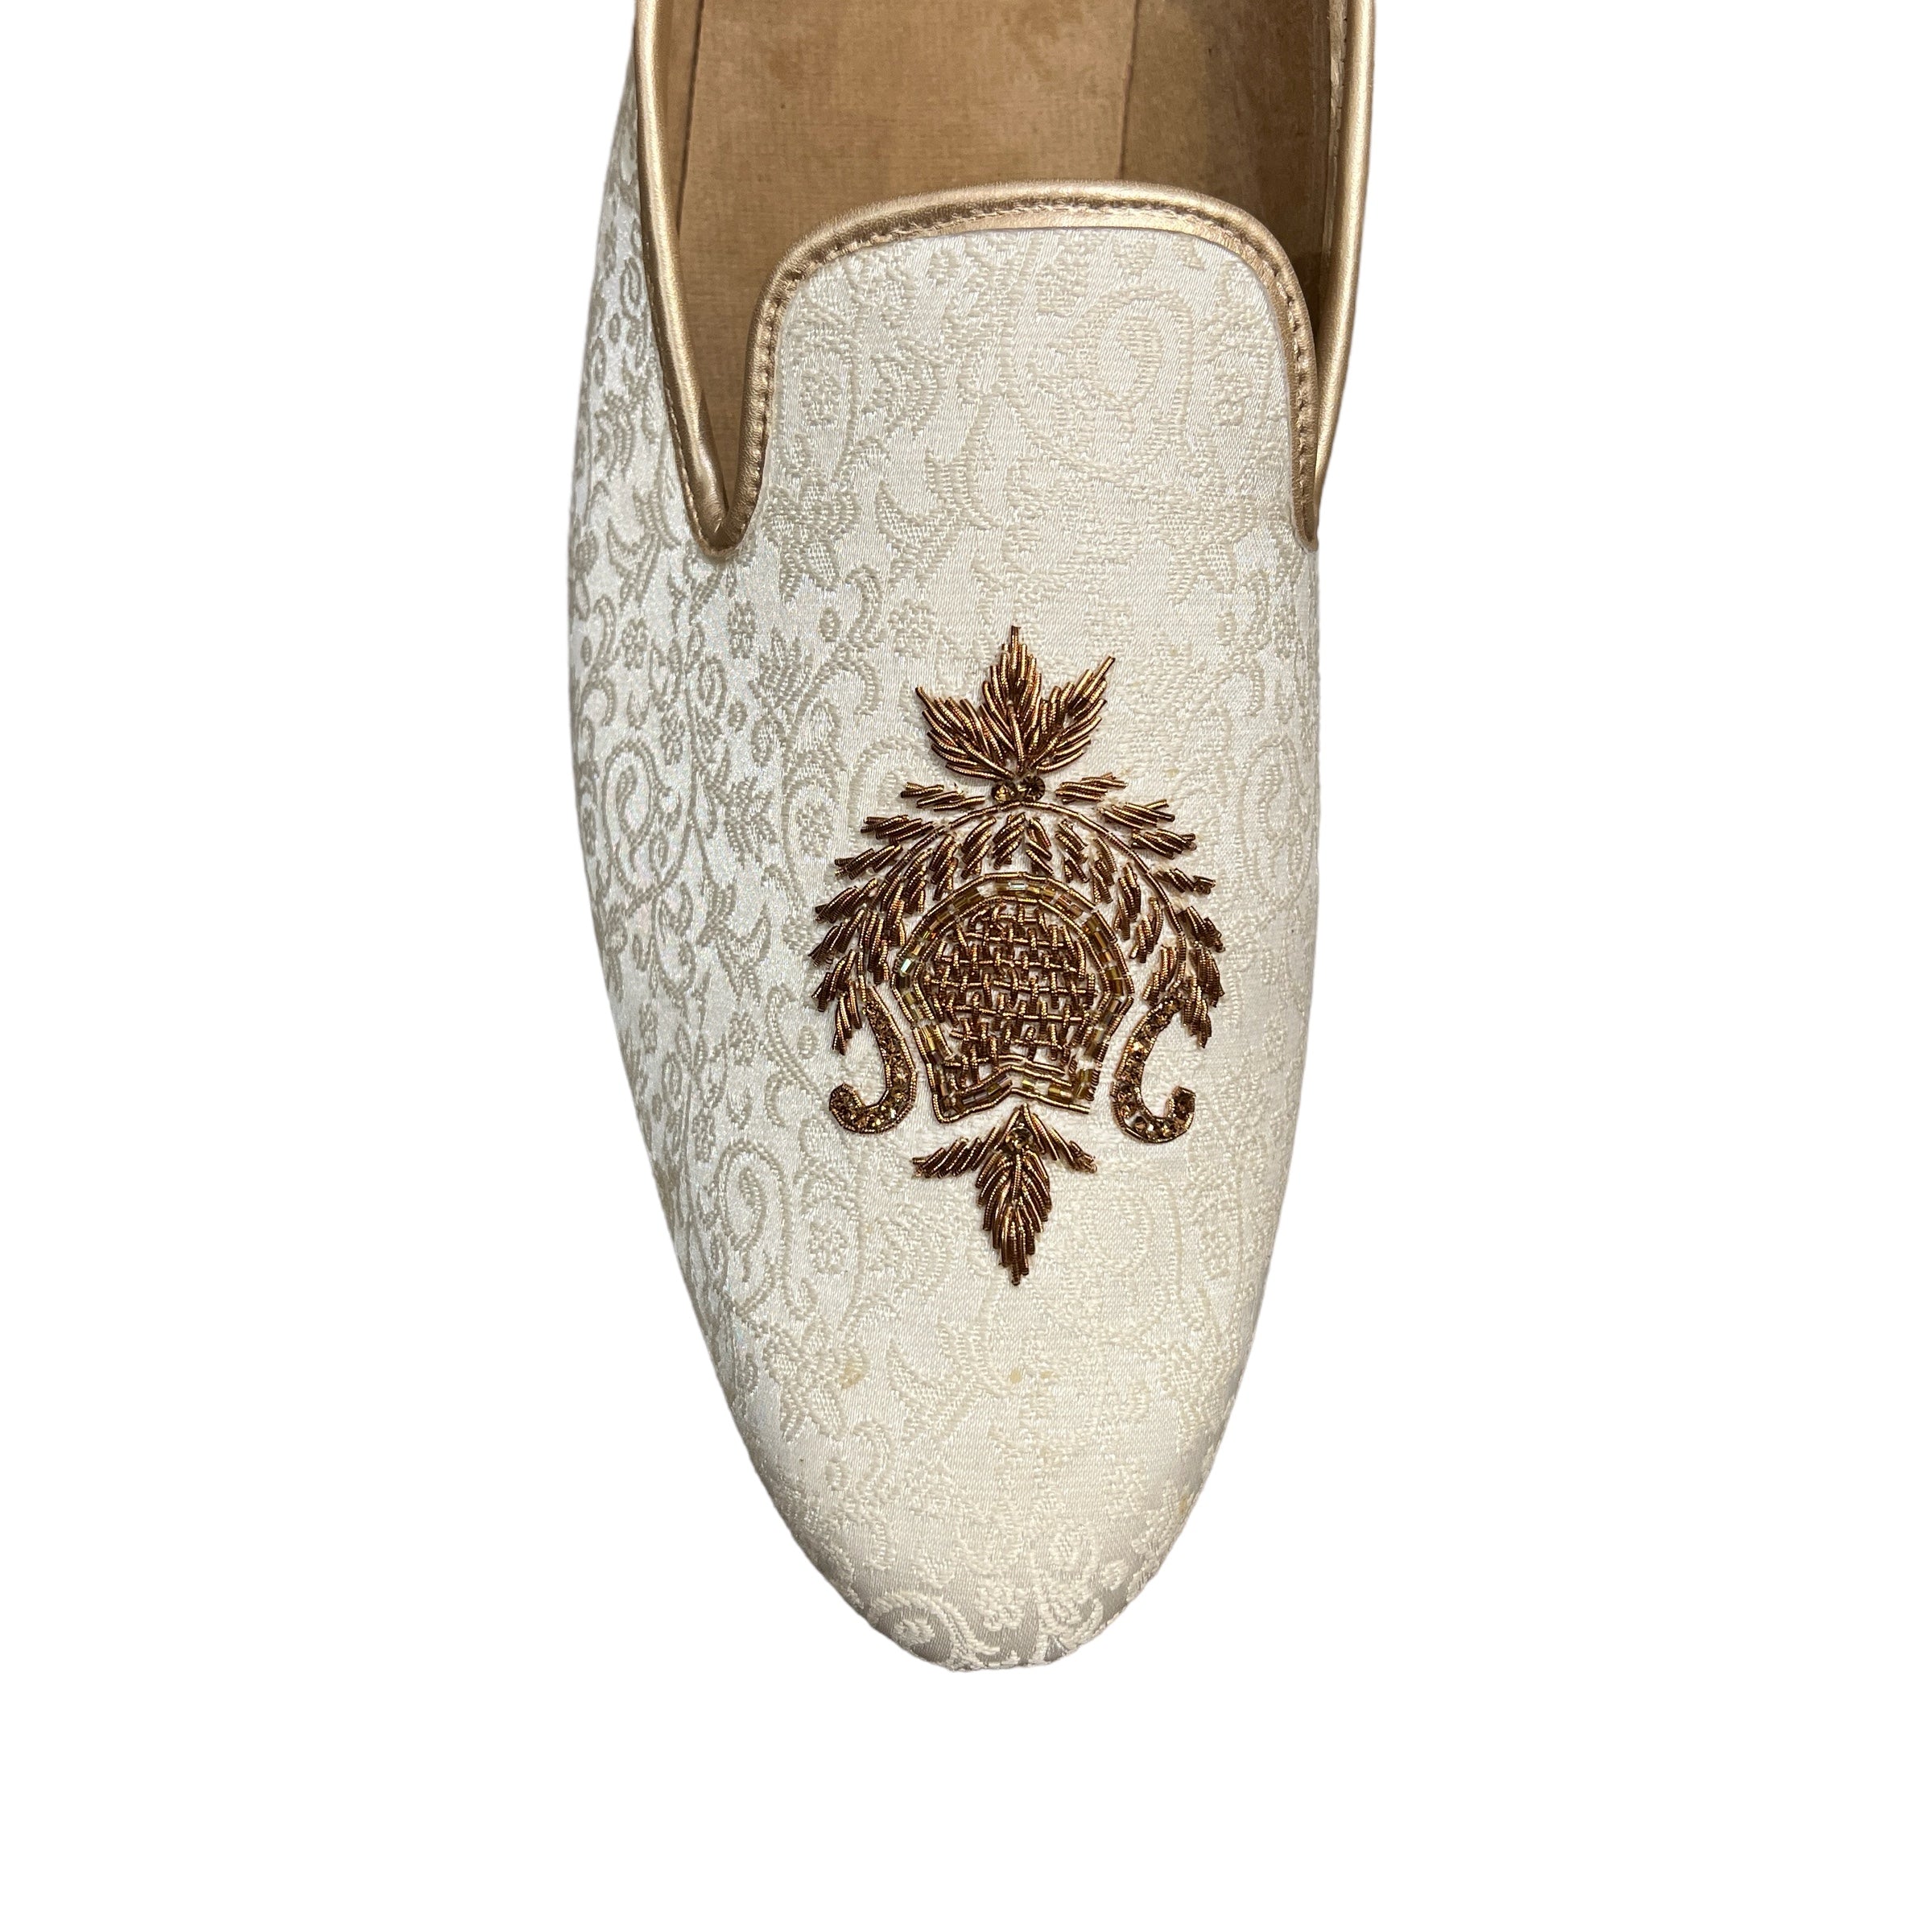 Gold & Ivory Zardosi Embroidered Loafers - Vintage India NYC